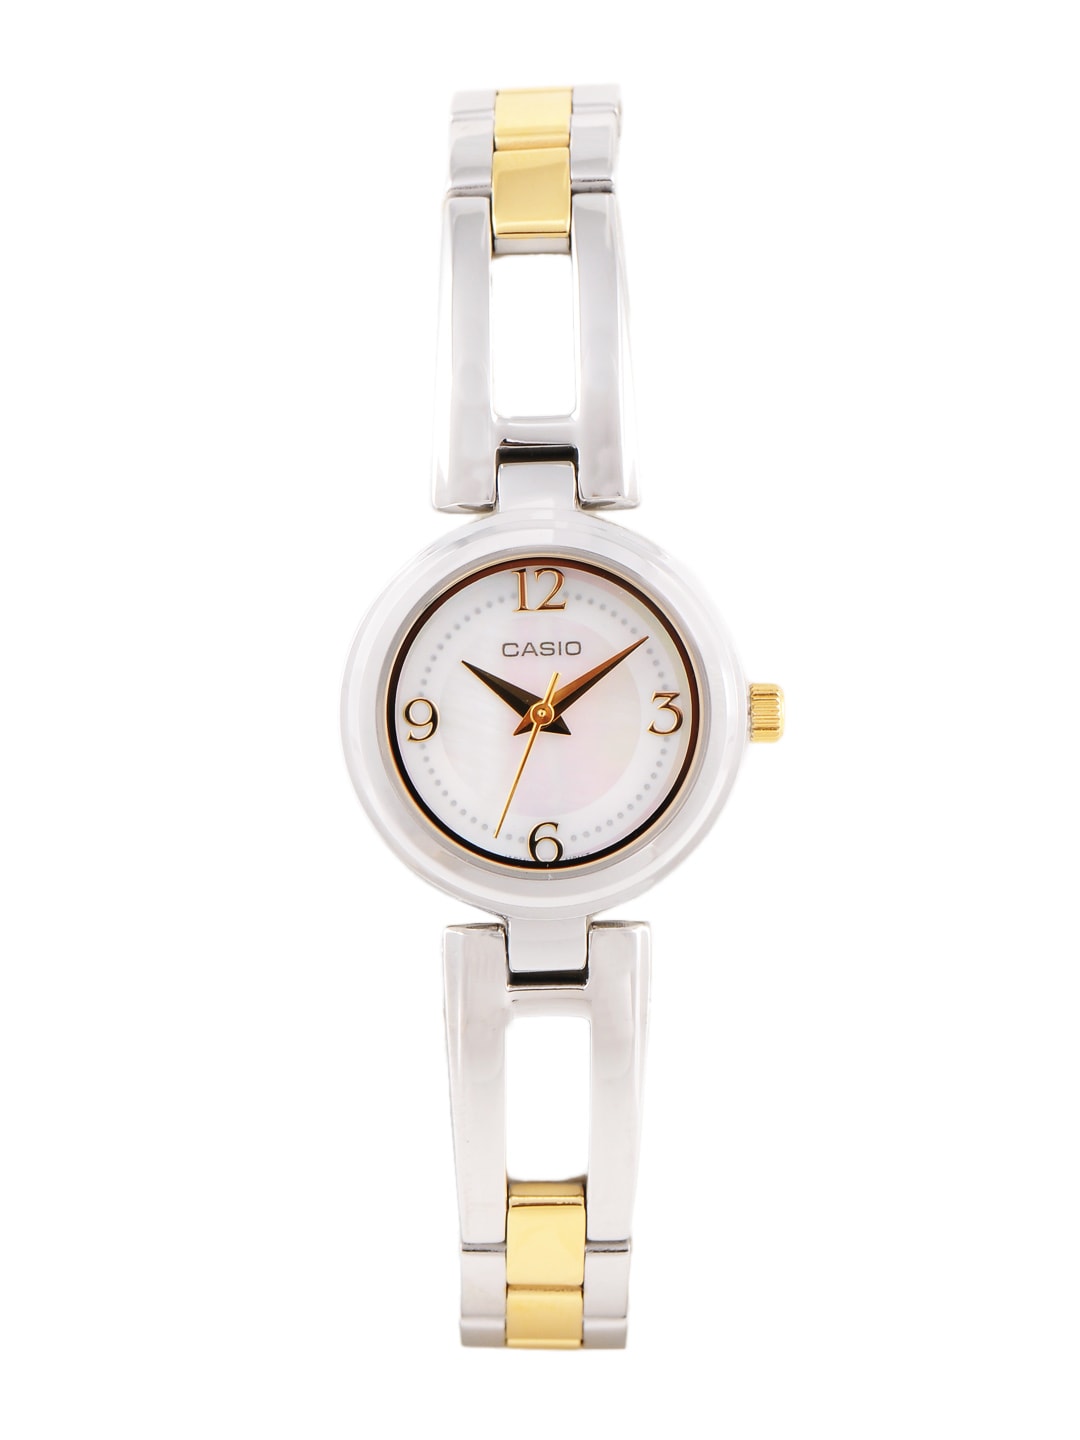 CASIO ENTICER Women White Dial Analogue Watch A634